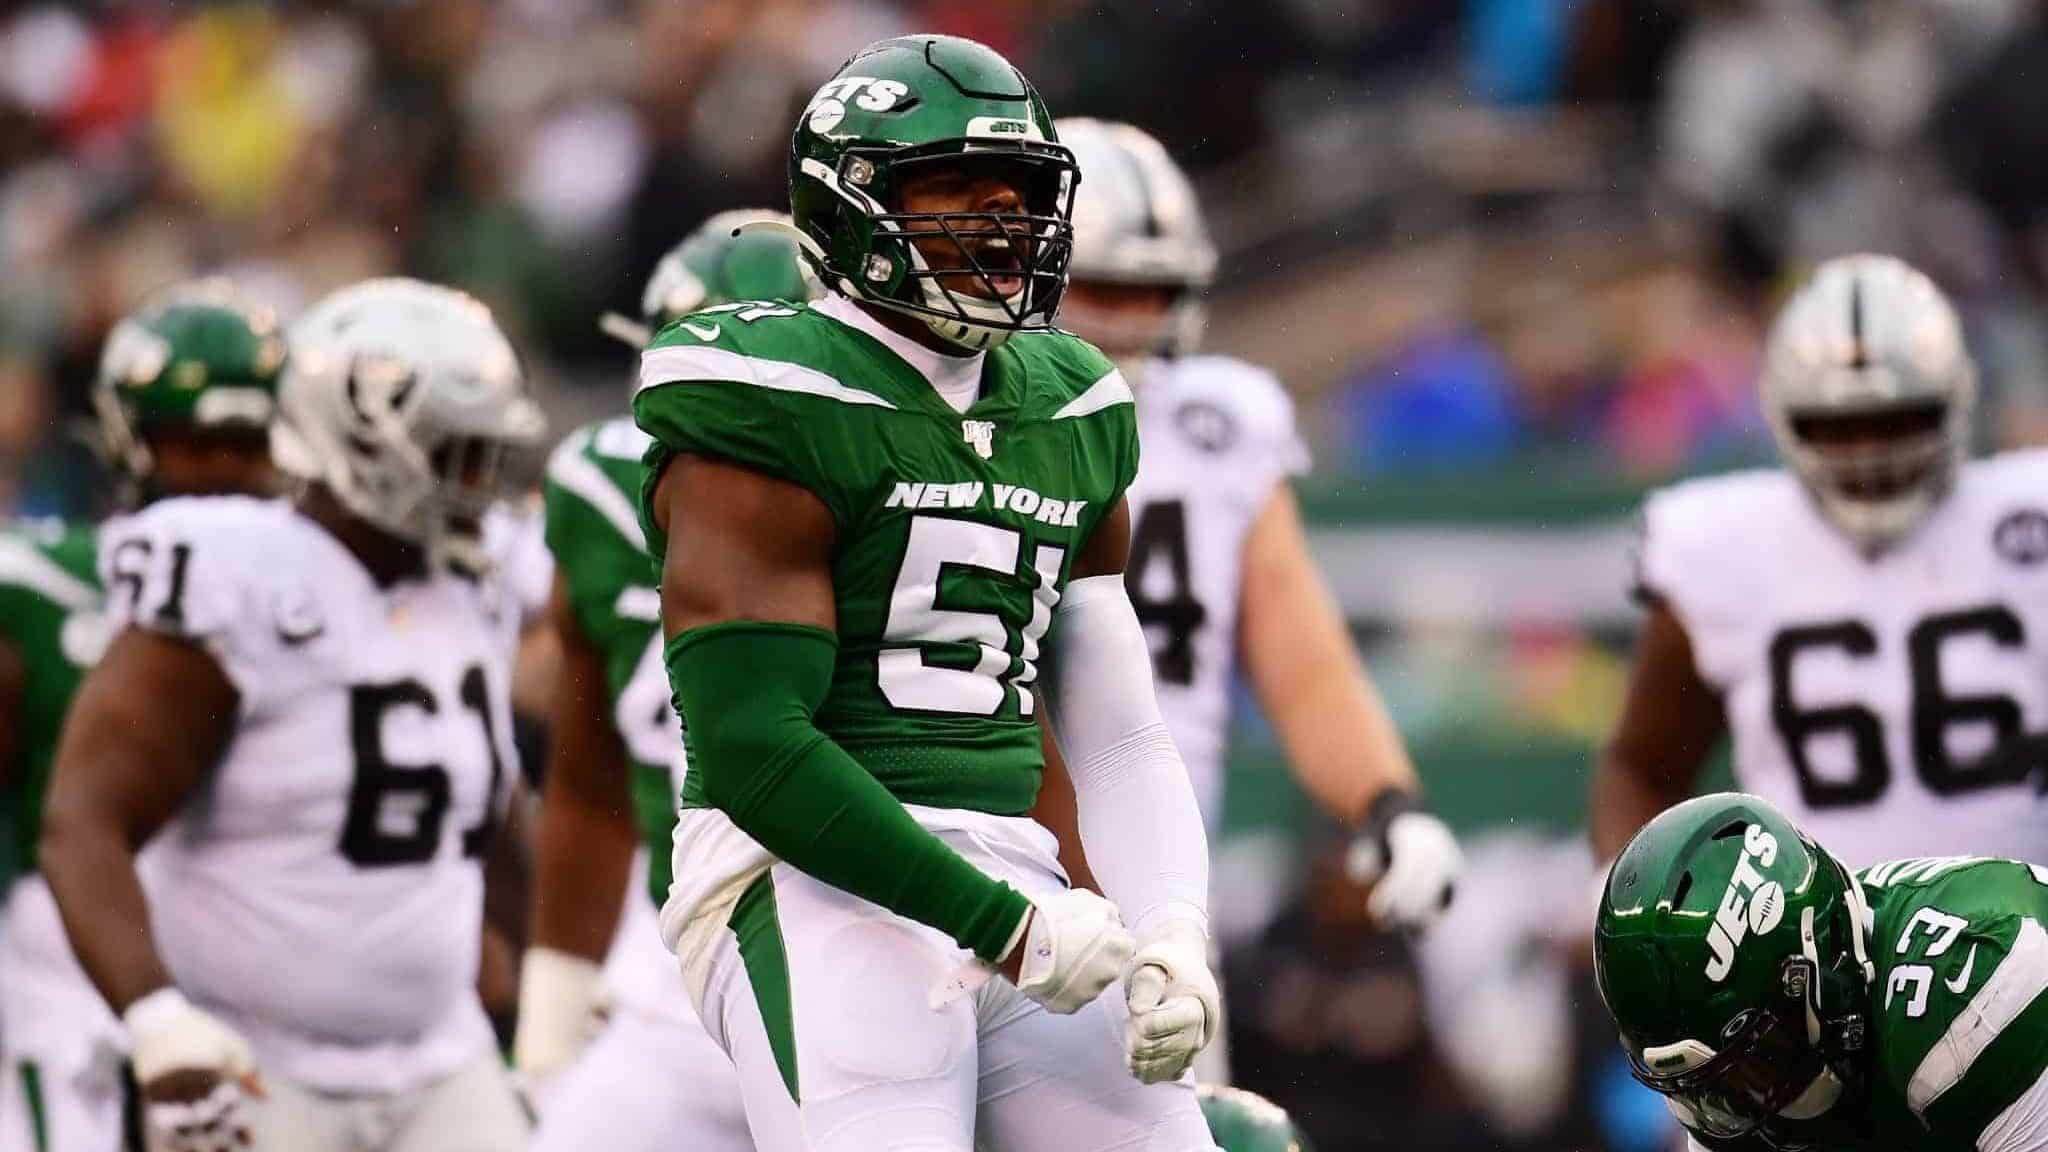 EAST RUTHERFORD, NEW JERSEY - NOVEMBER 24: Brandon Copeland #51 of the New York Jets reacts during the second quarter of their game against the Oakland Raiders at MetLife Stadium on November 24, 2019 in East Rutherford, New Jersey.